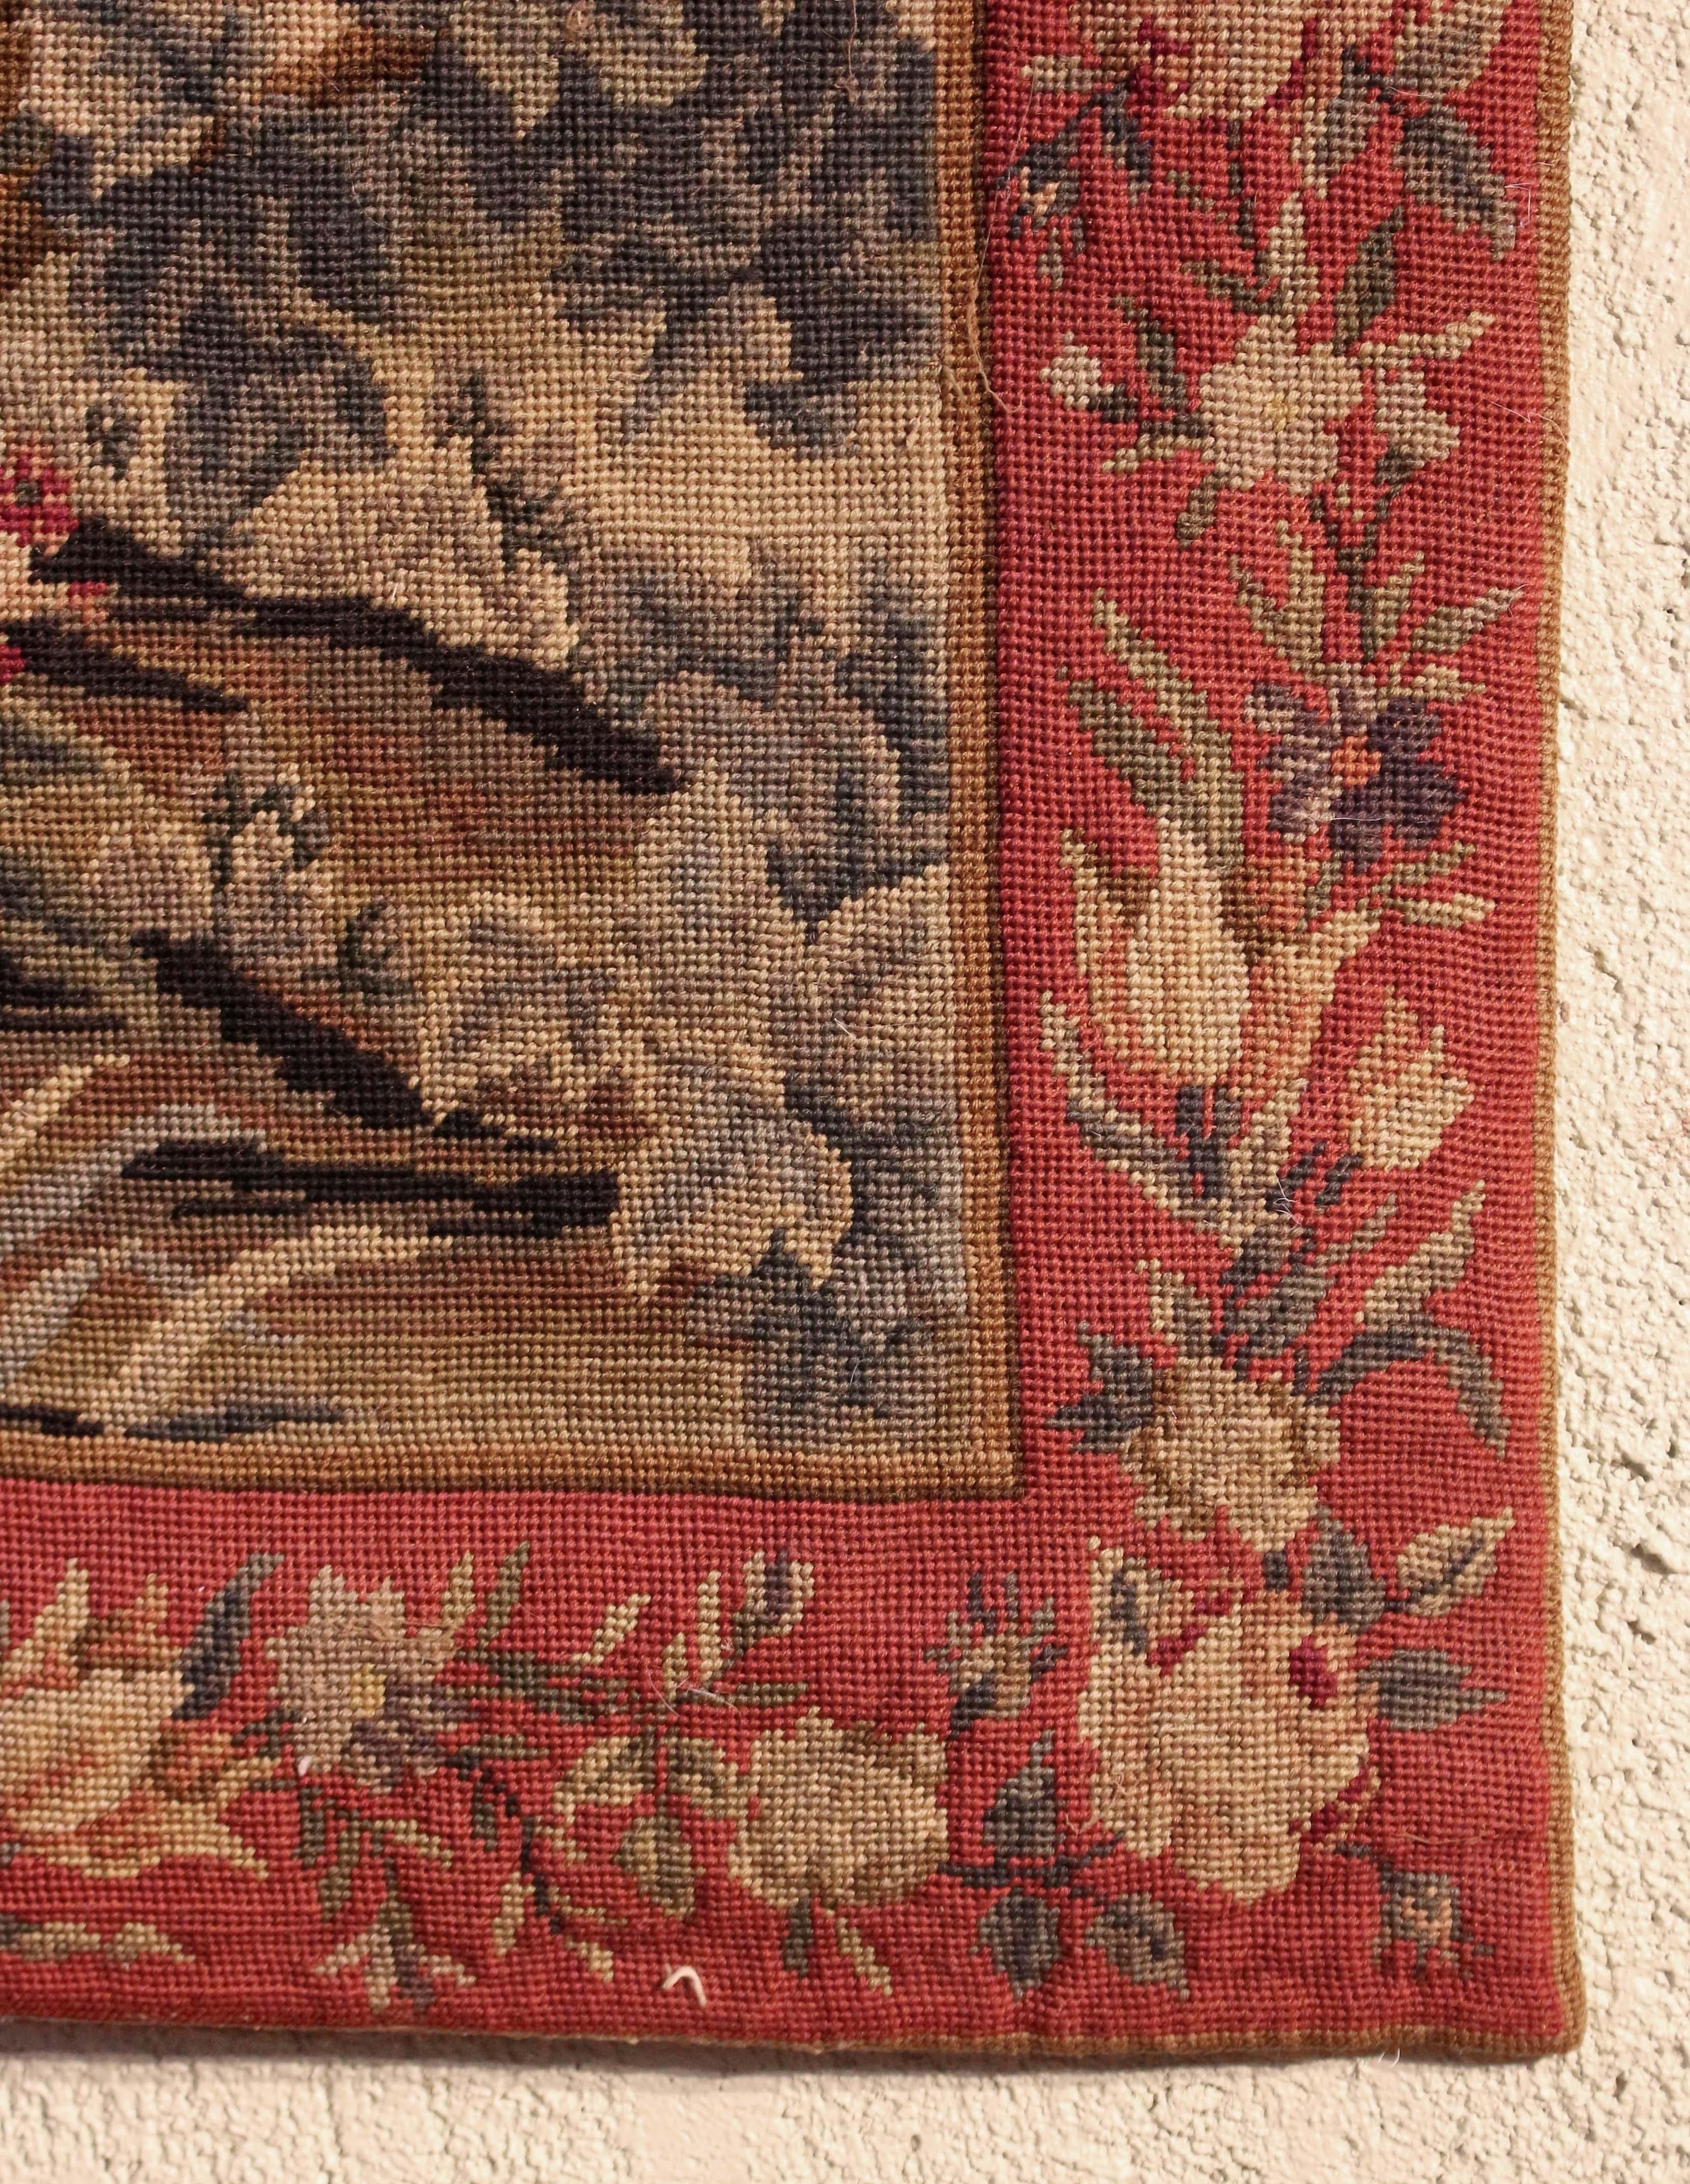 Mid-19th Century French or German Needlepoint & Petit Point Tapestry In Good Condition For Sale In Chapel Hill, NC